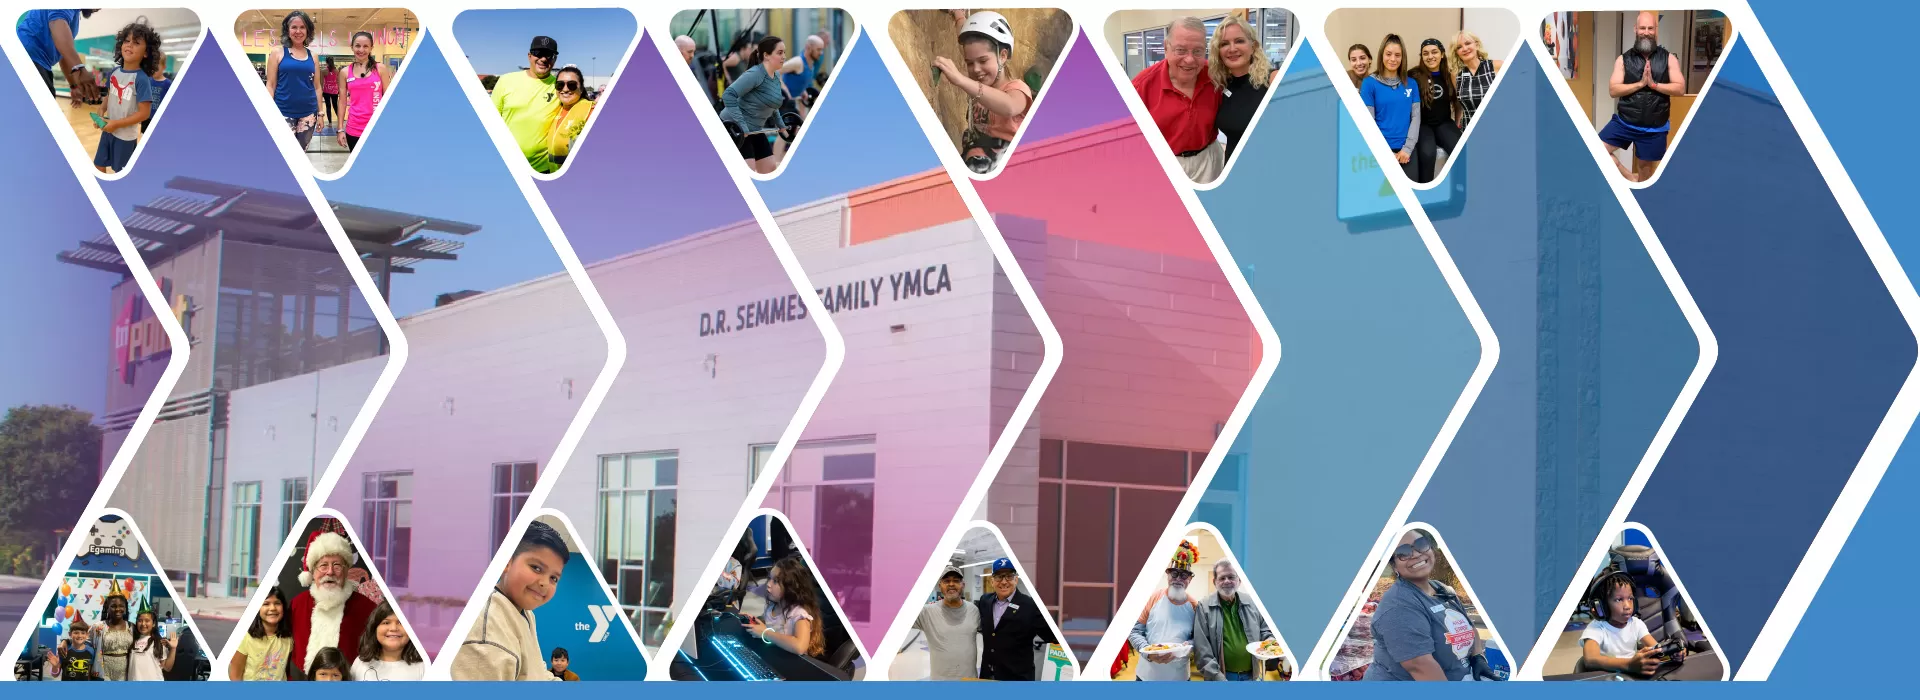 Welcome to the D.R. Semmes Family YMCA!